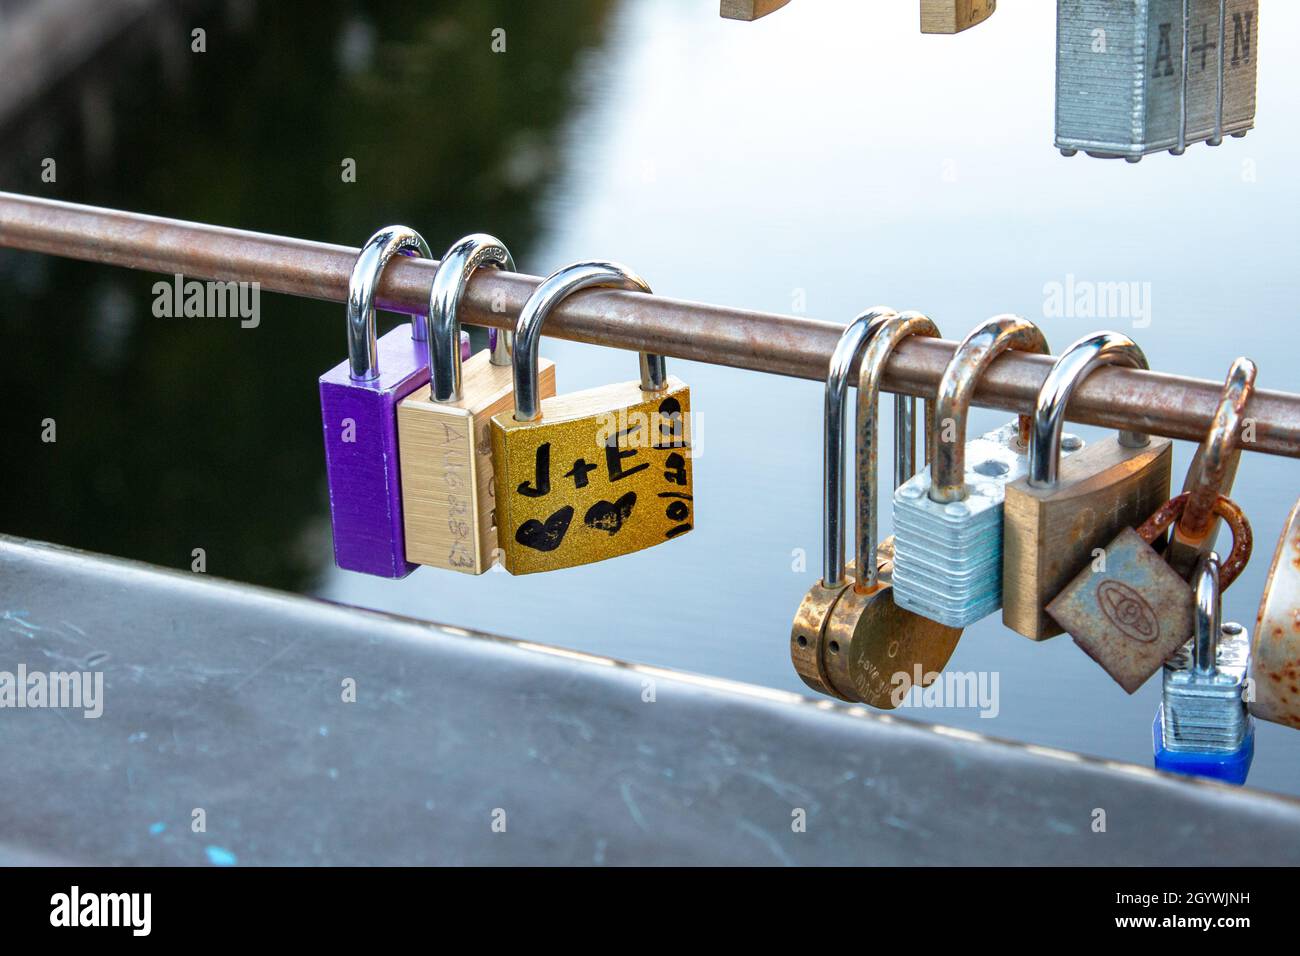 'Love locks': Locks with messages of love hanging from a bridge railing Stock Photo